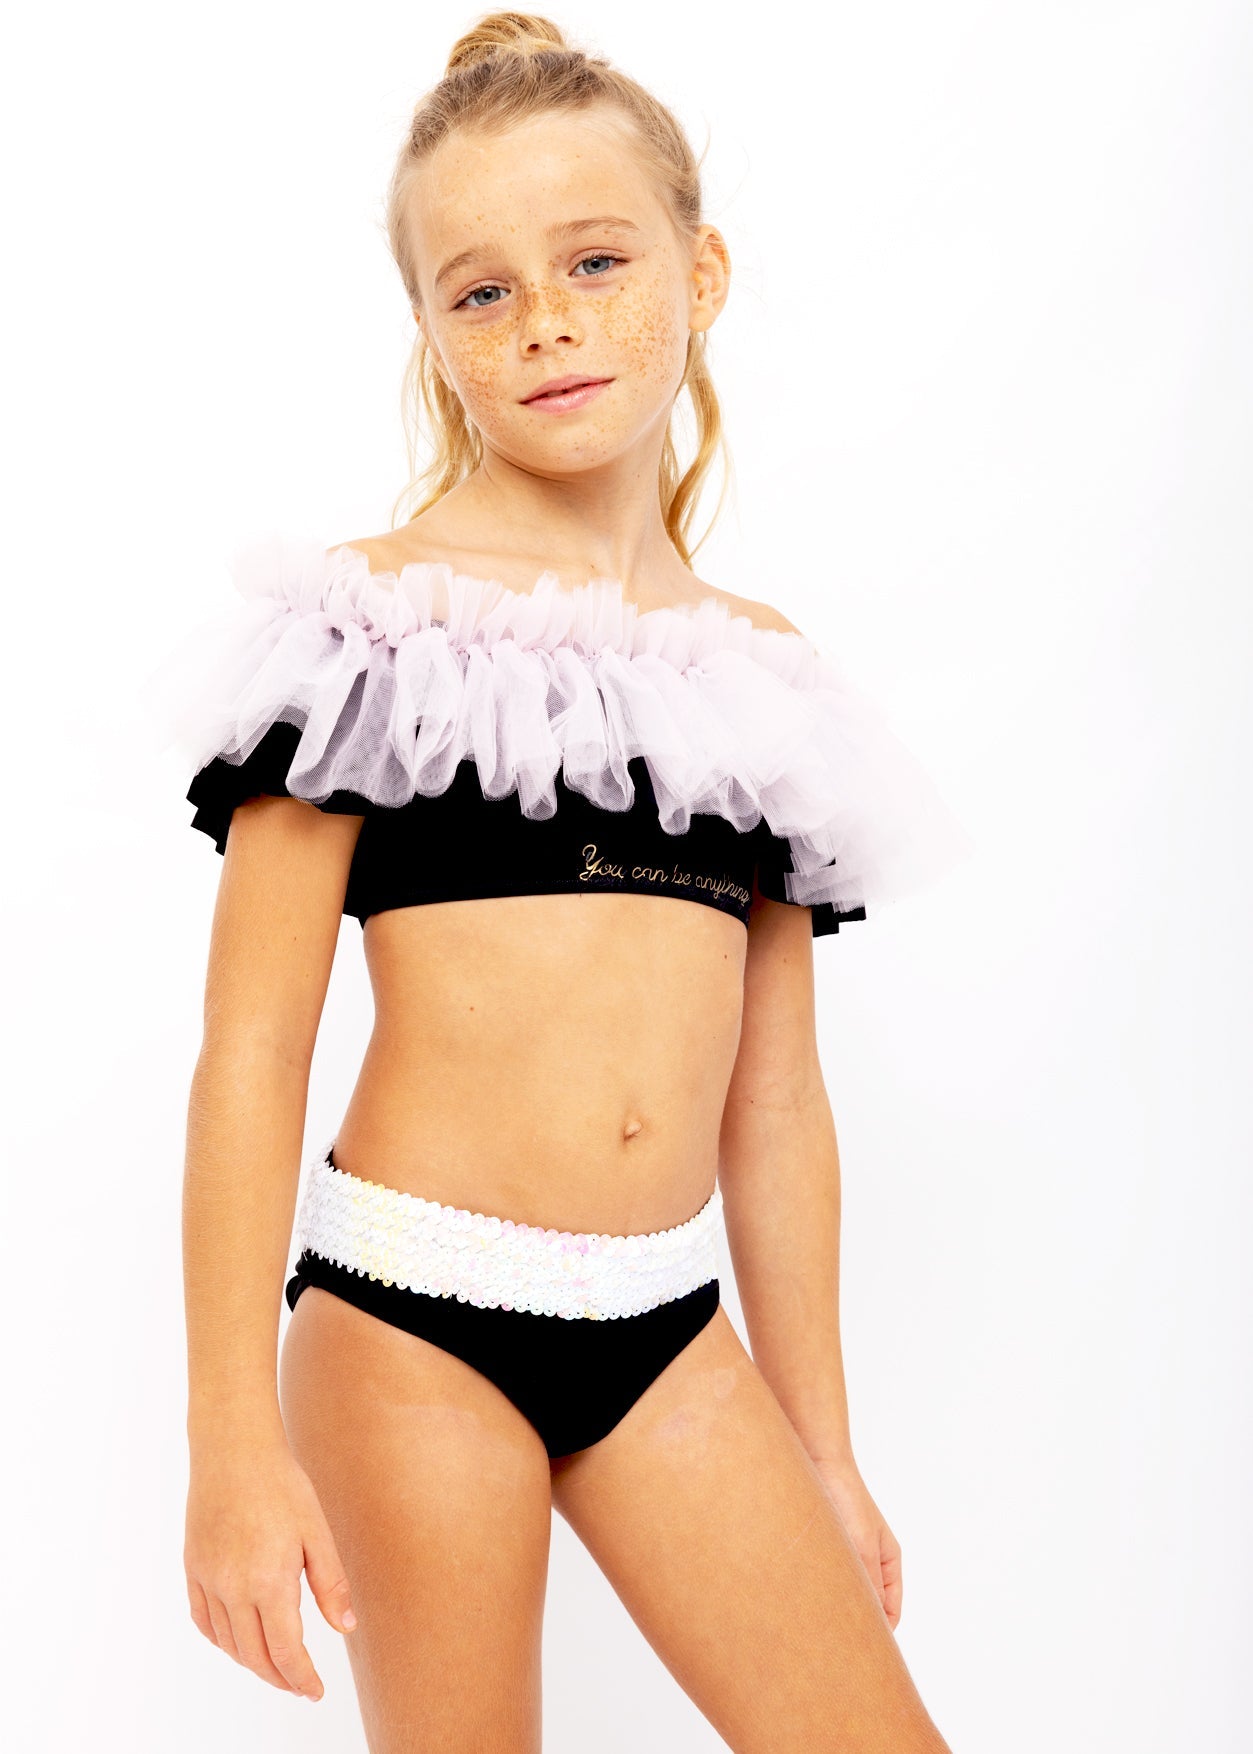 "You Can Be Anything" Black Bikini with Pink Tulle & Sequin Belt